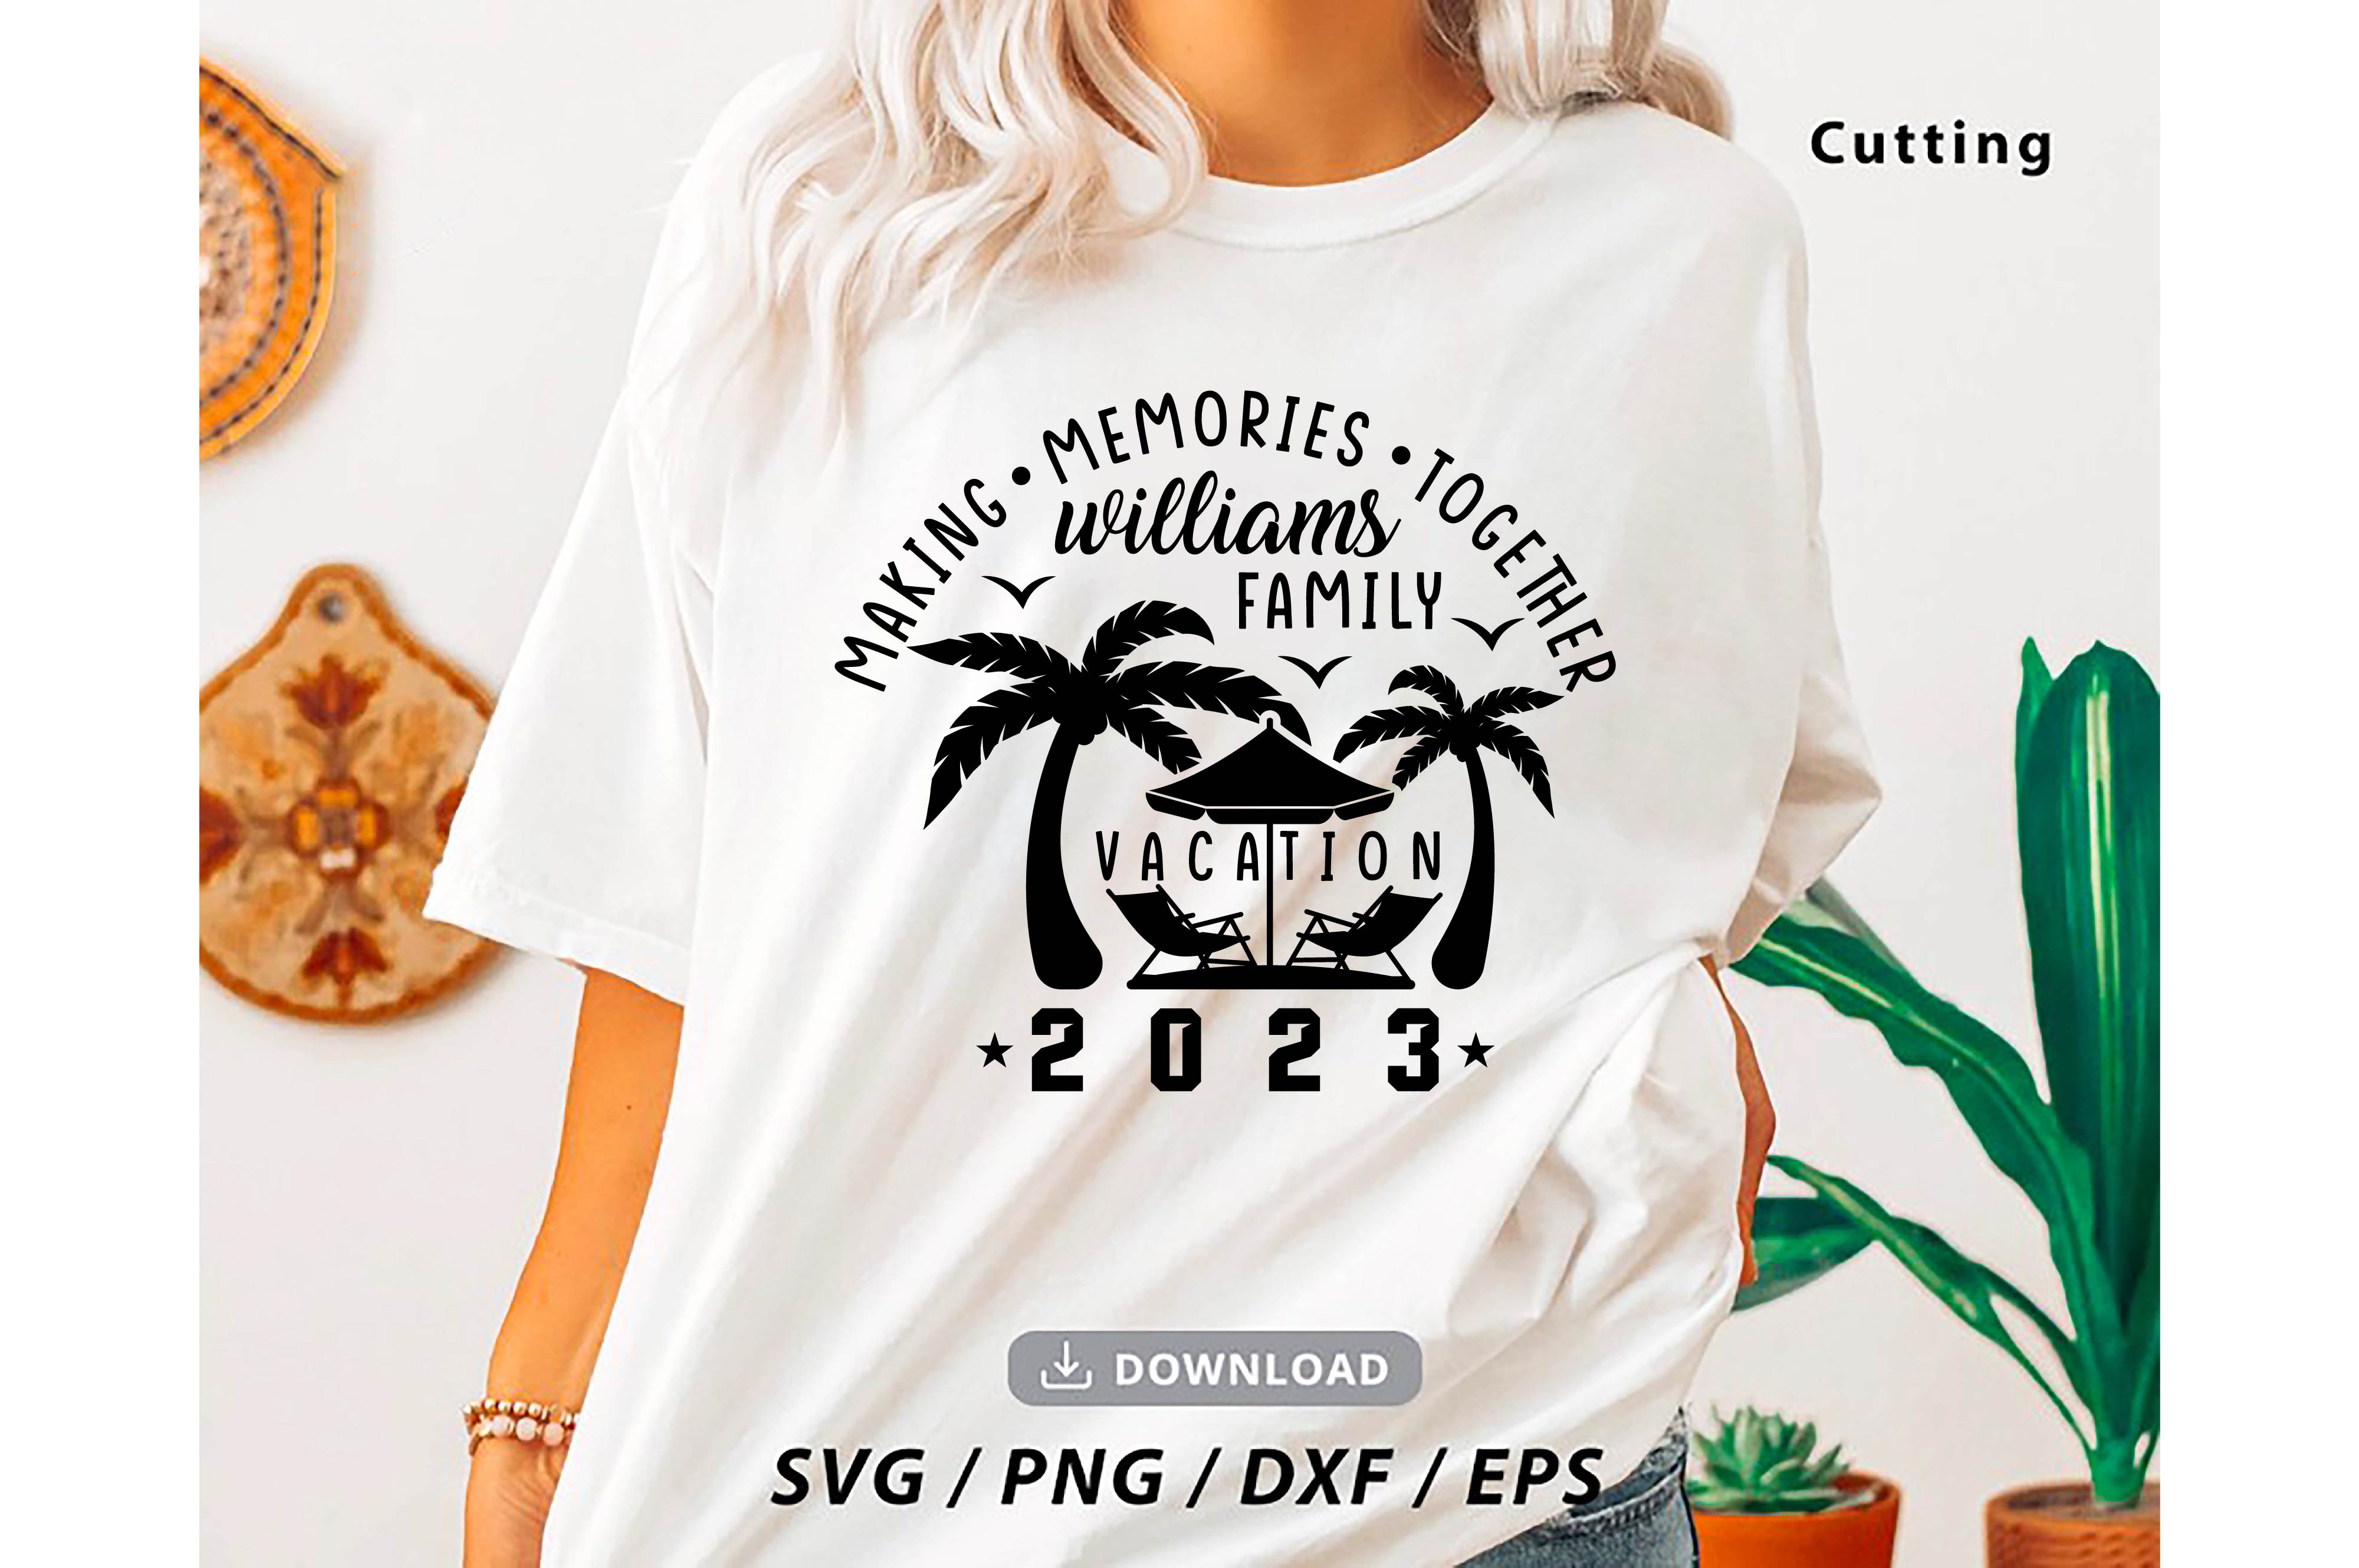 family vacation 2023 svg making memories together custom family vacation cut files summer 2023 vacations 05 882